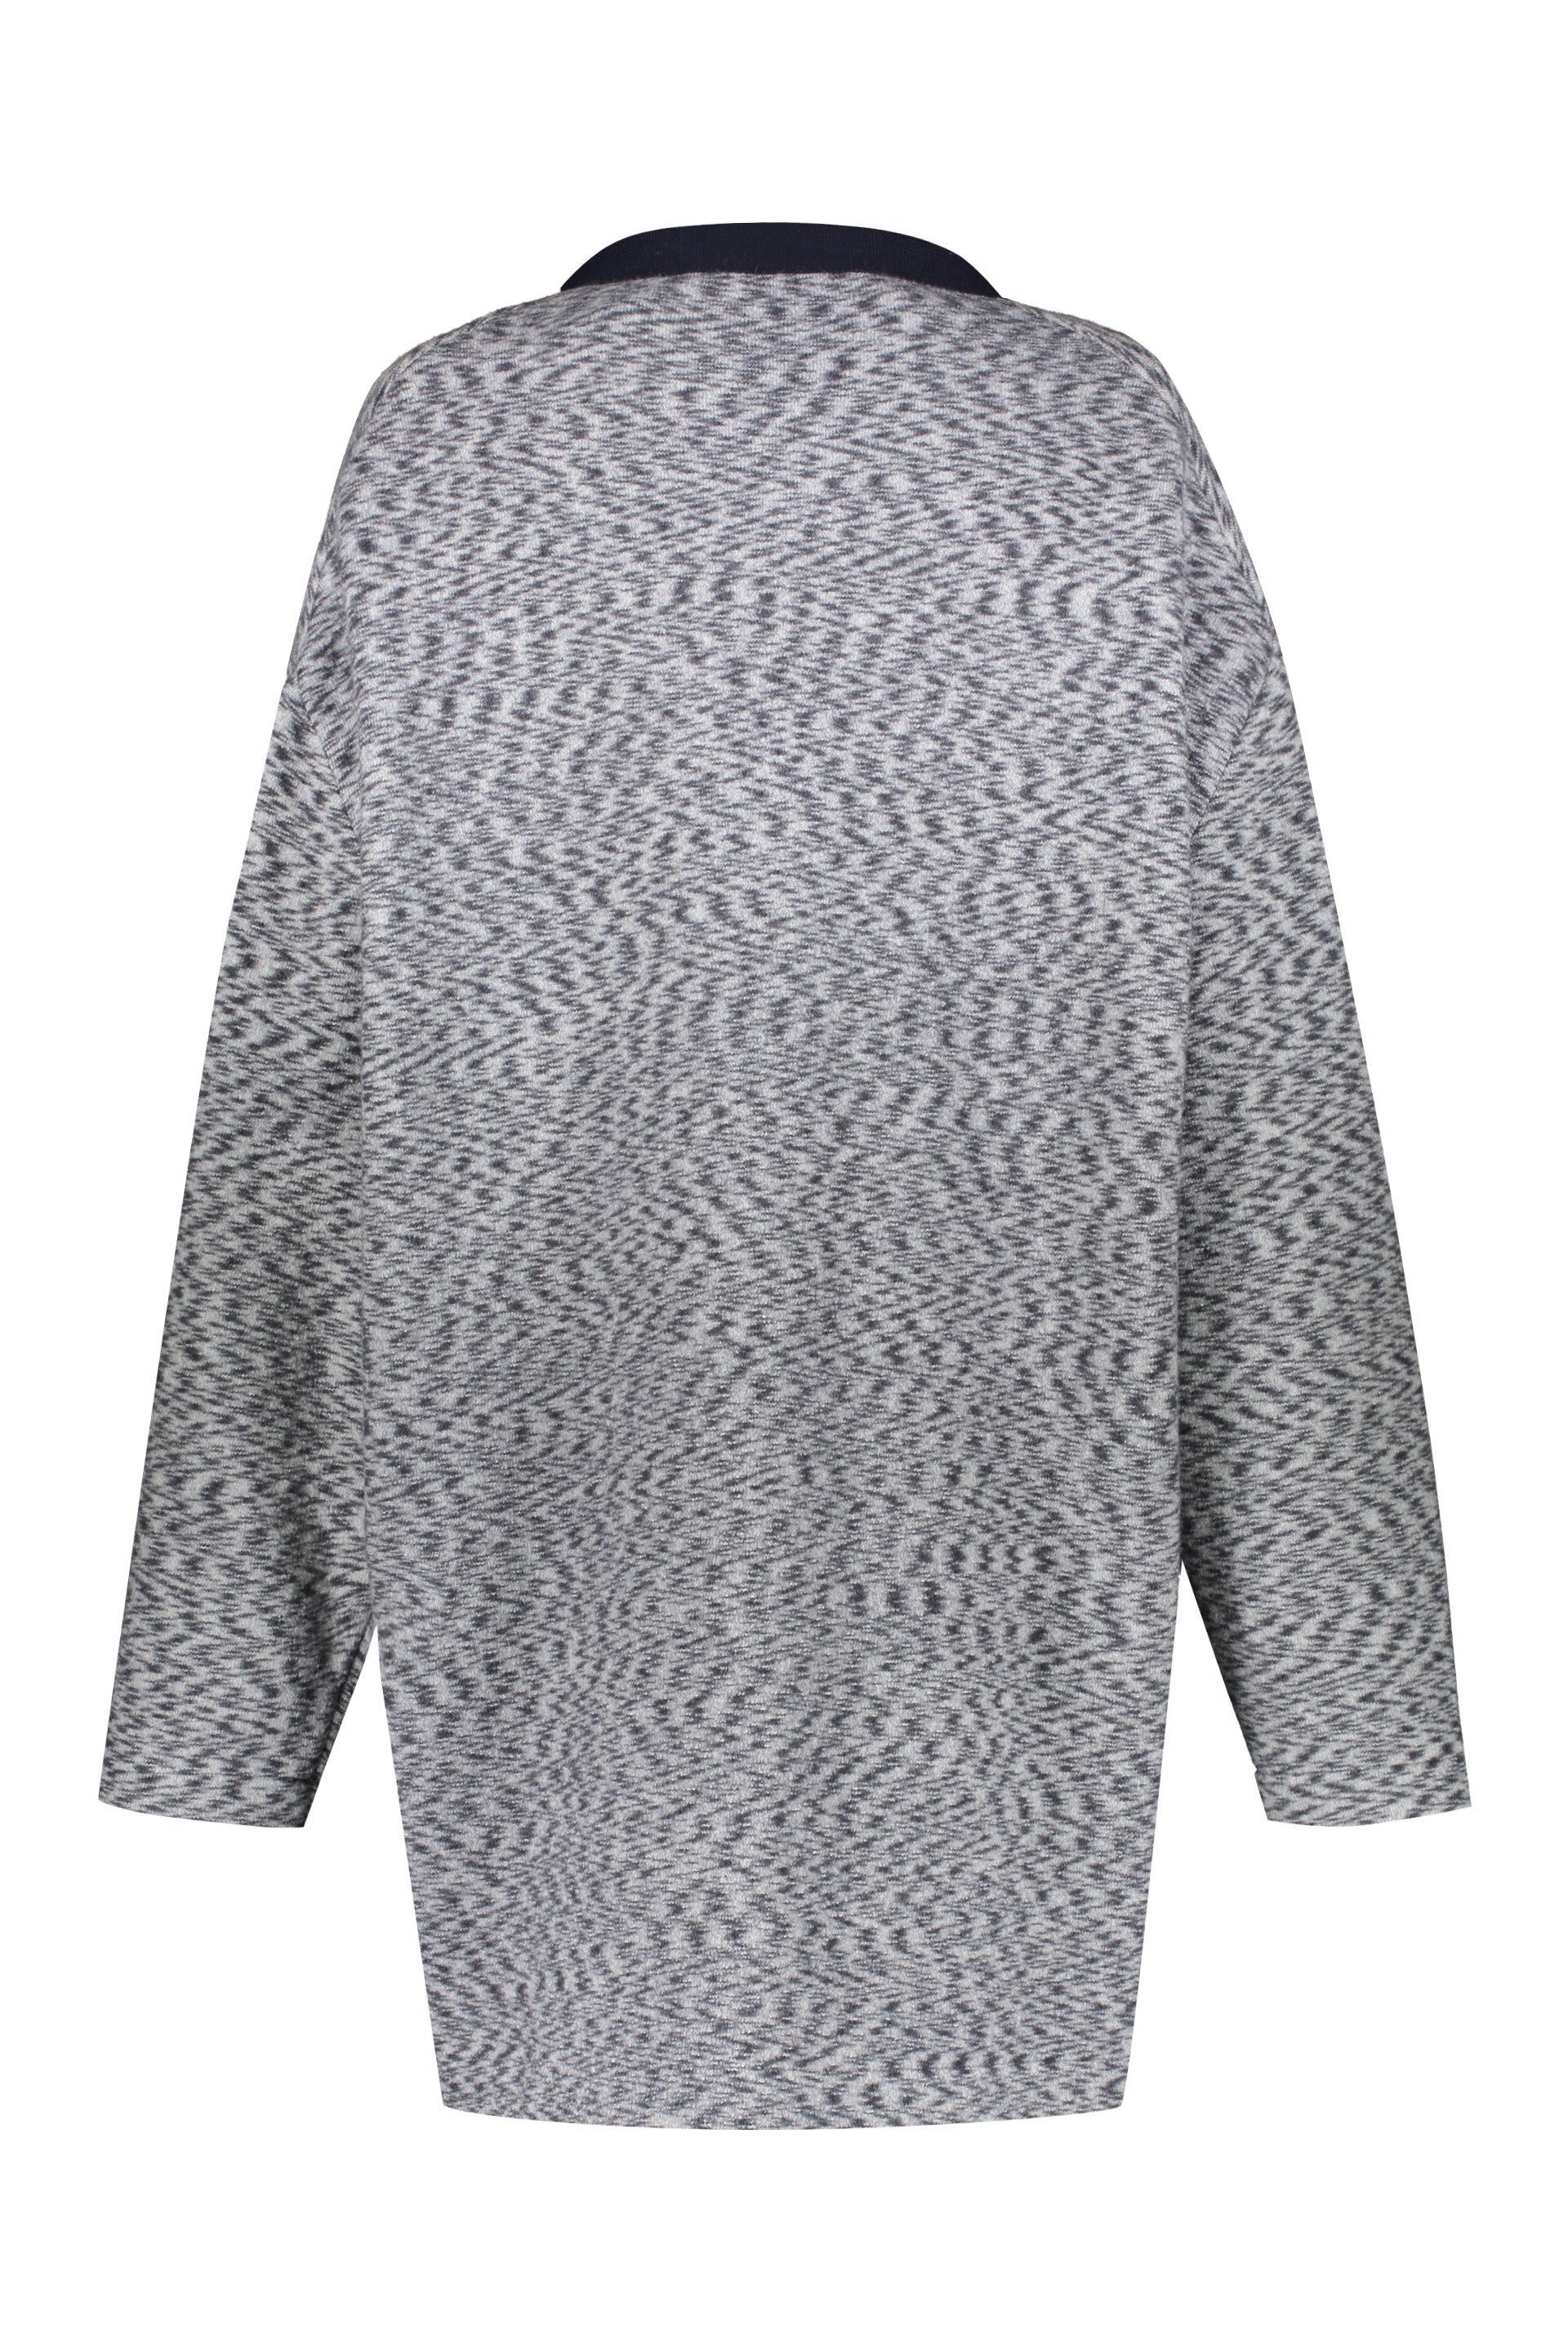 Missoni-OUTLET-SALE-Wool-blend-cardigan-Strick-S-ARCHIVE-COLLECTION-2.jpg